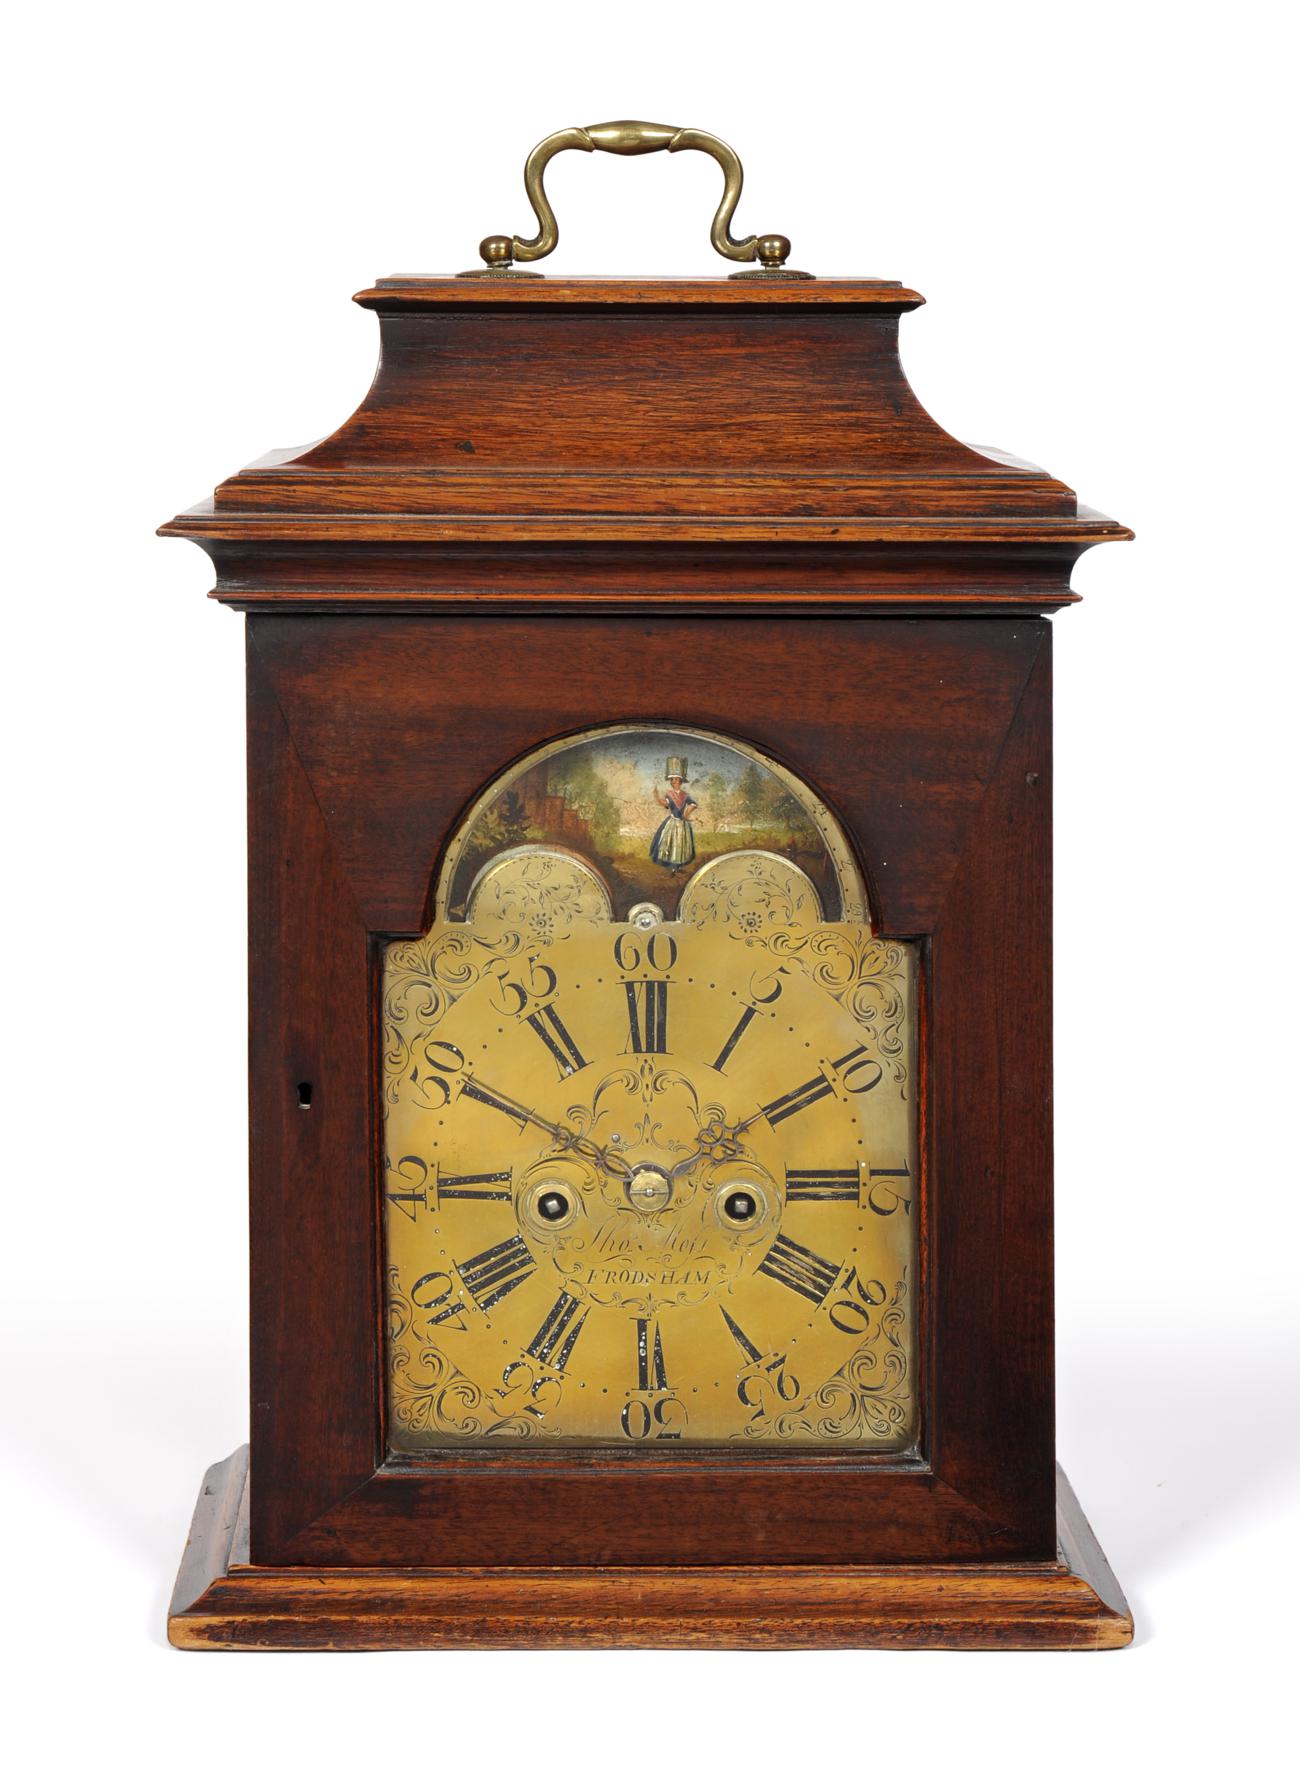 A Mahogany Striking Table Clock, signed Thos Moss, Frodsham, circa 1770, inverted bell top with